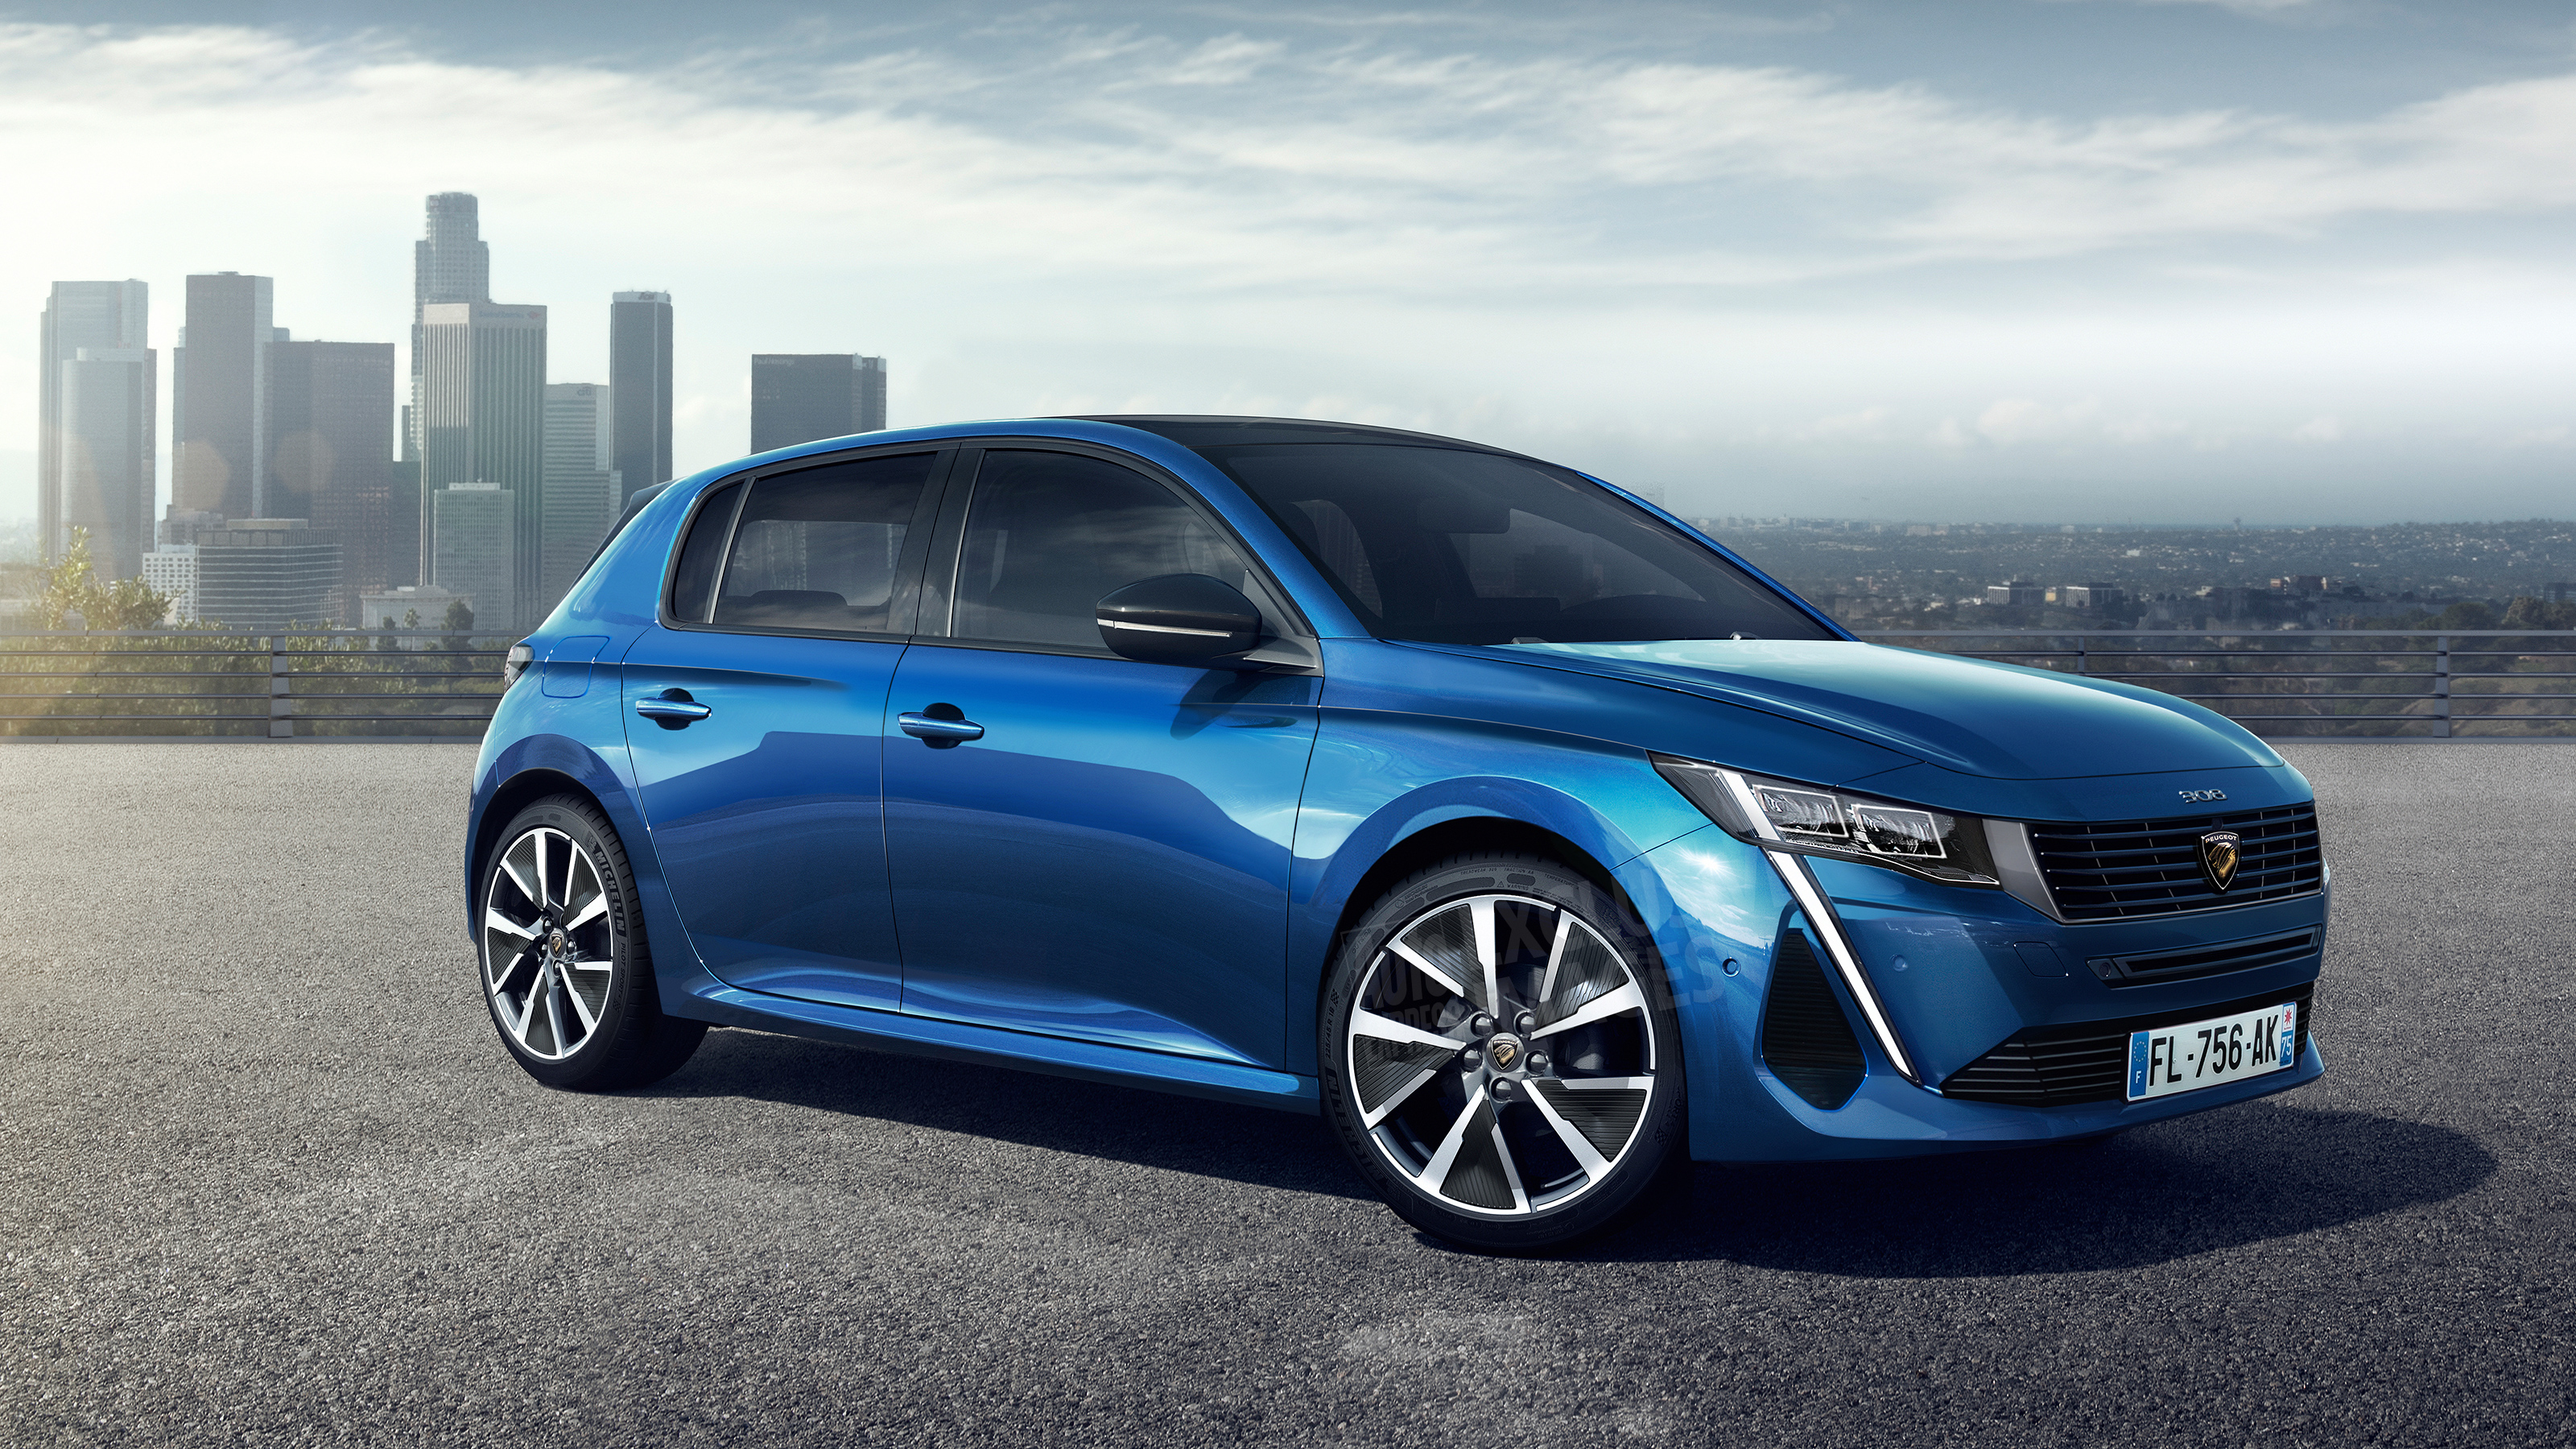 New 21 Peugeot 308 Hatchback Set For March Reveal Auto Express